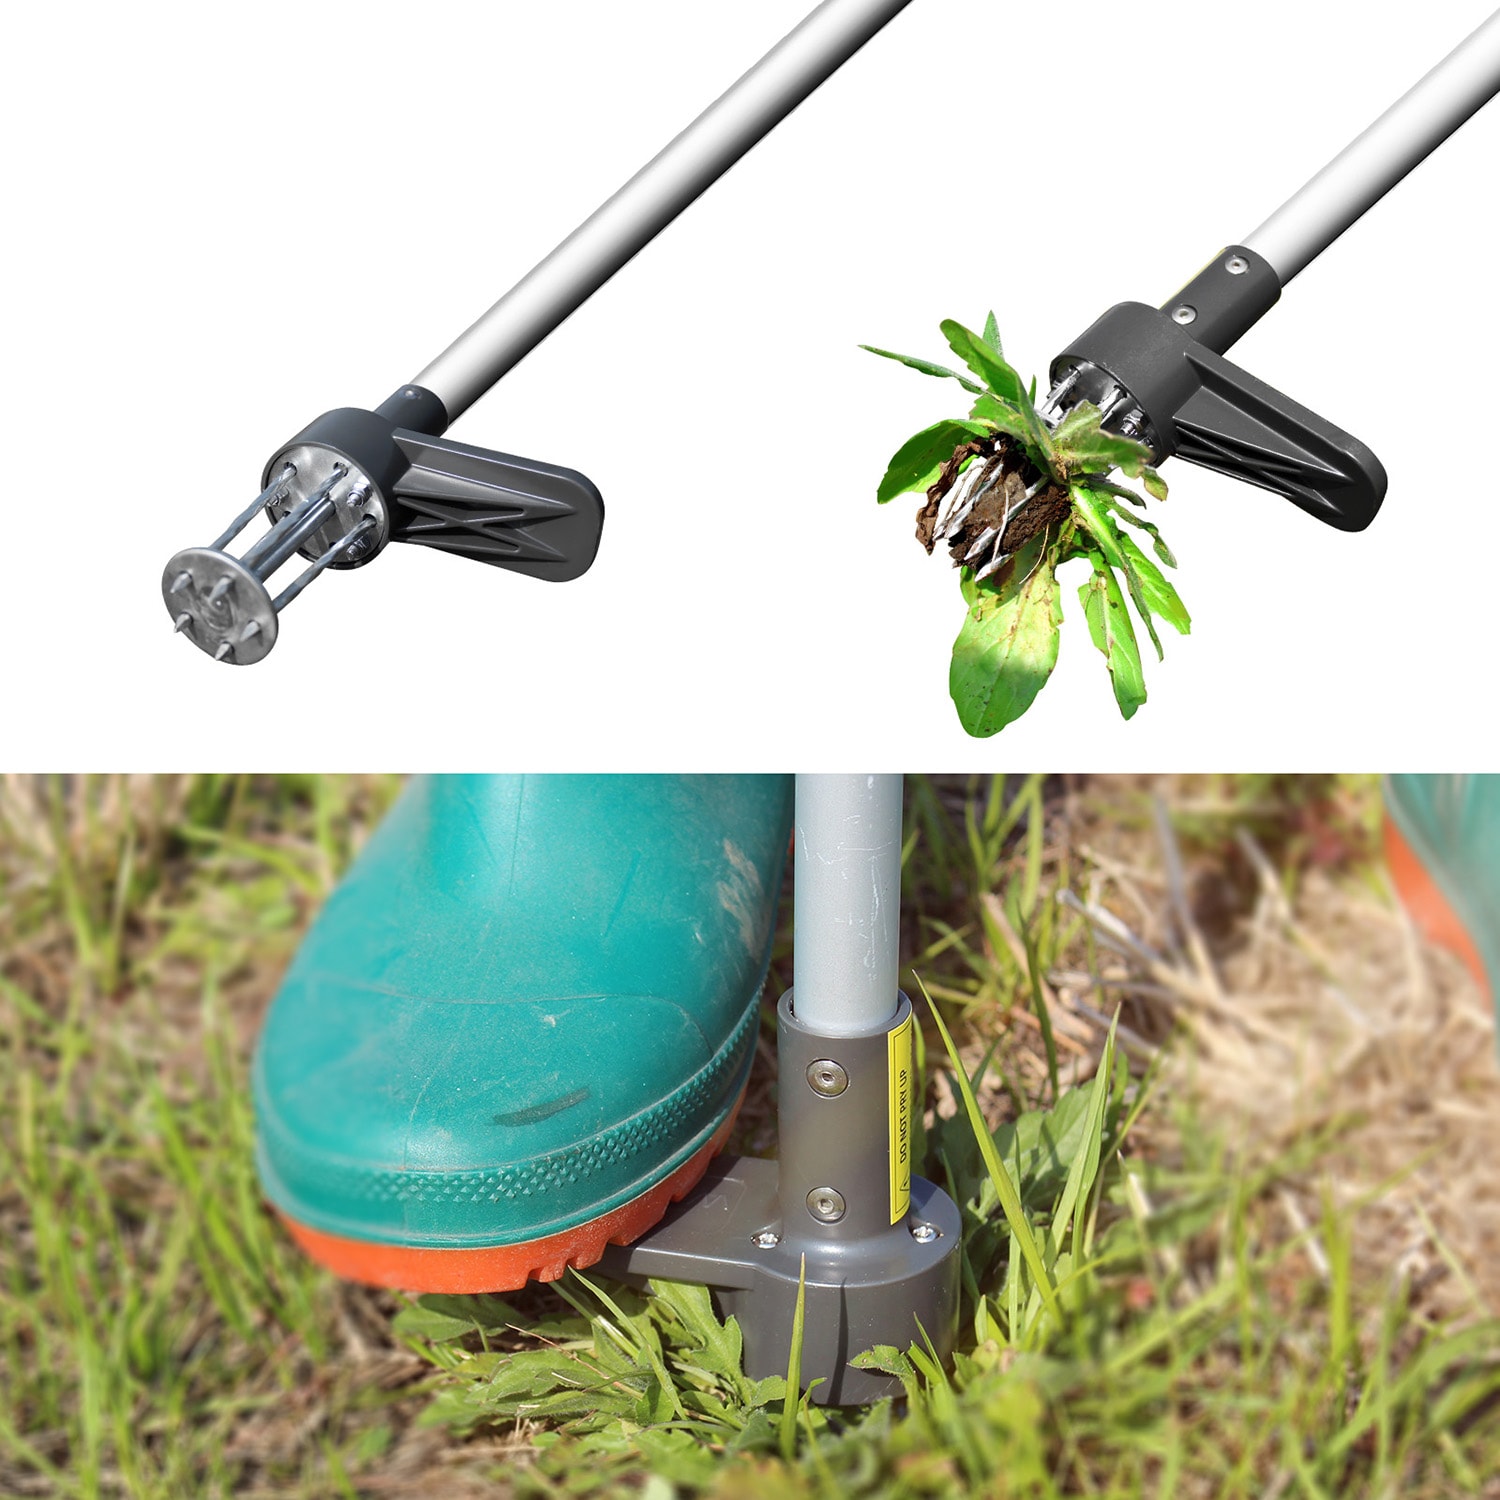 Walensee Long Handle Weeder Tool - Stainless Steel Head, Composite Handle,  38-in Length, Lightweight and Easy to Use in the Weeders department at